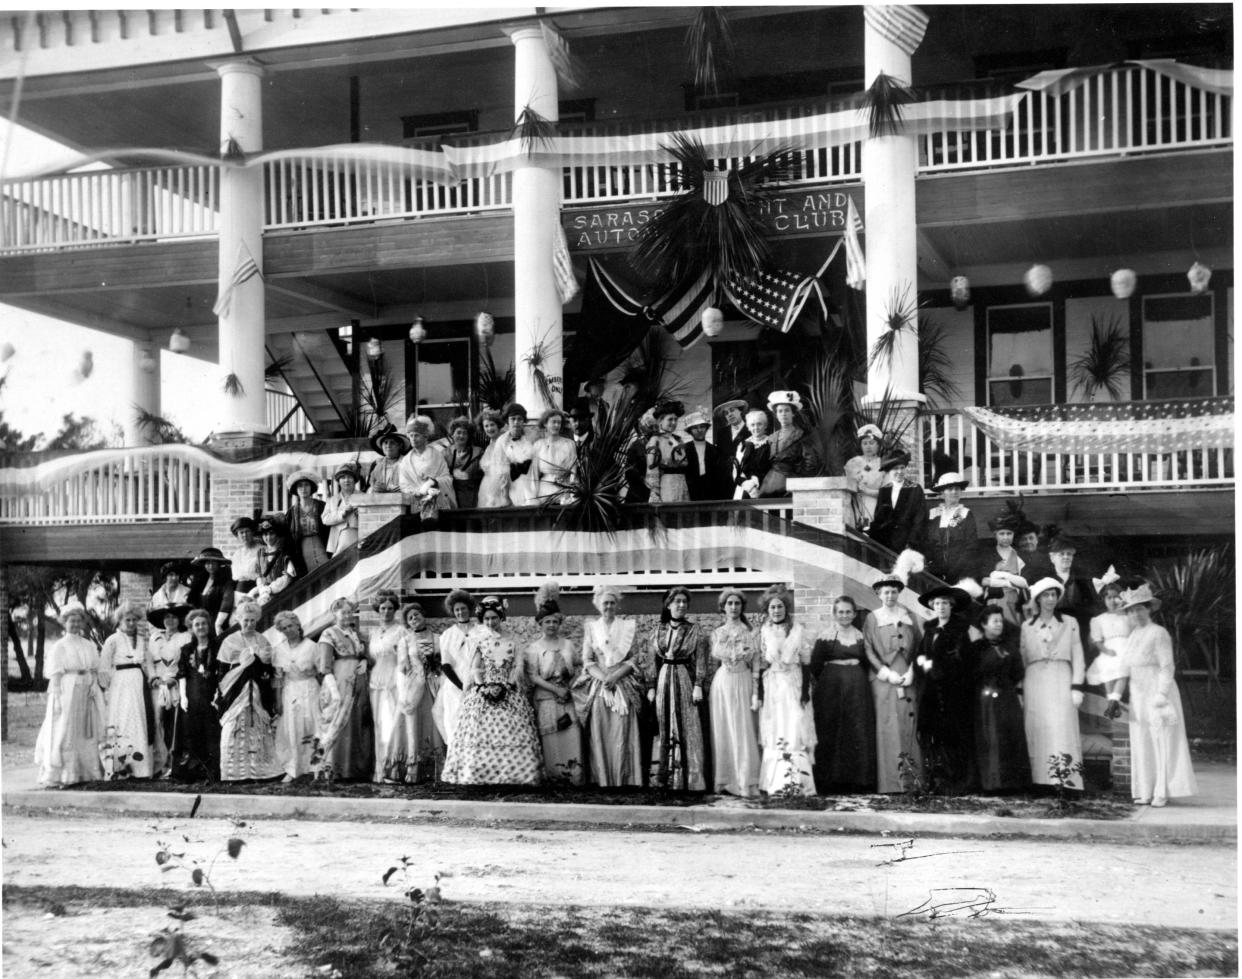 Members of the Sarasota Woman’s Club dressed in colonial fashion for tea at the Yacht and Automobile Club, circa 1914.